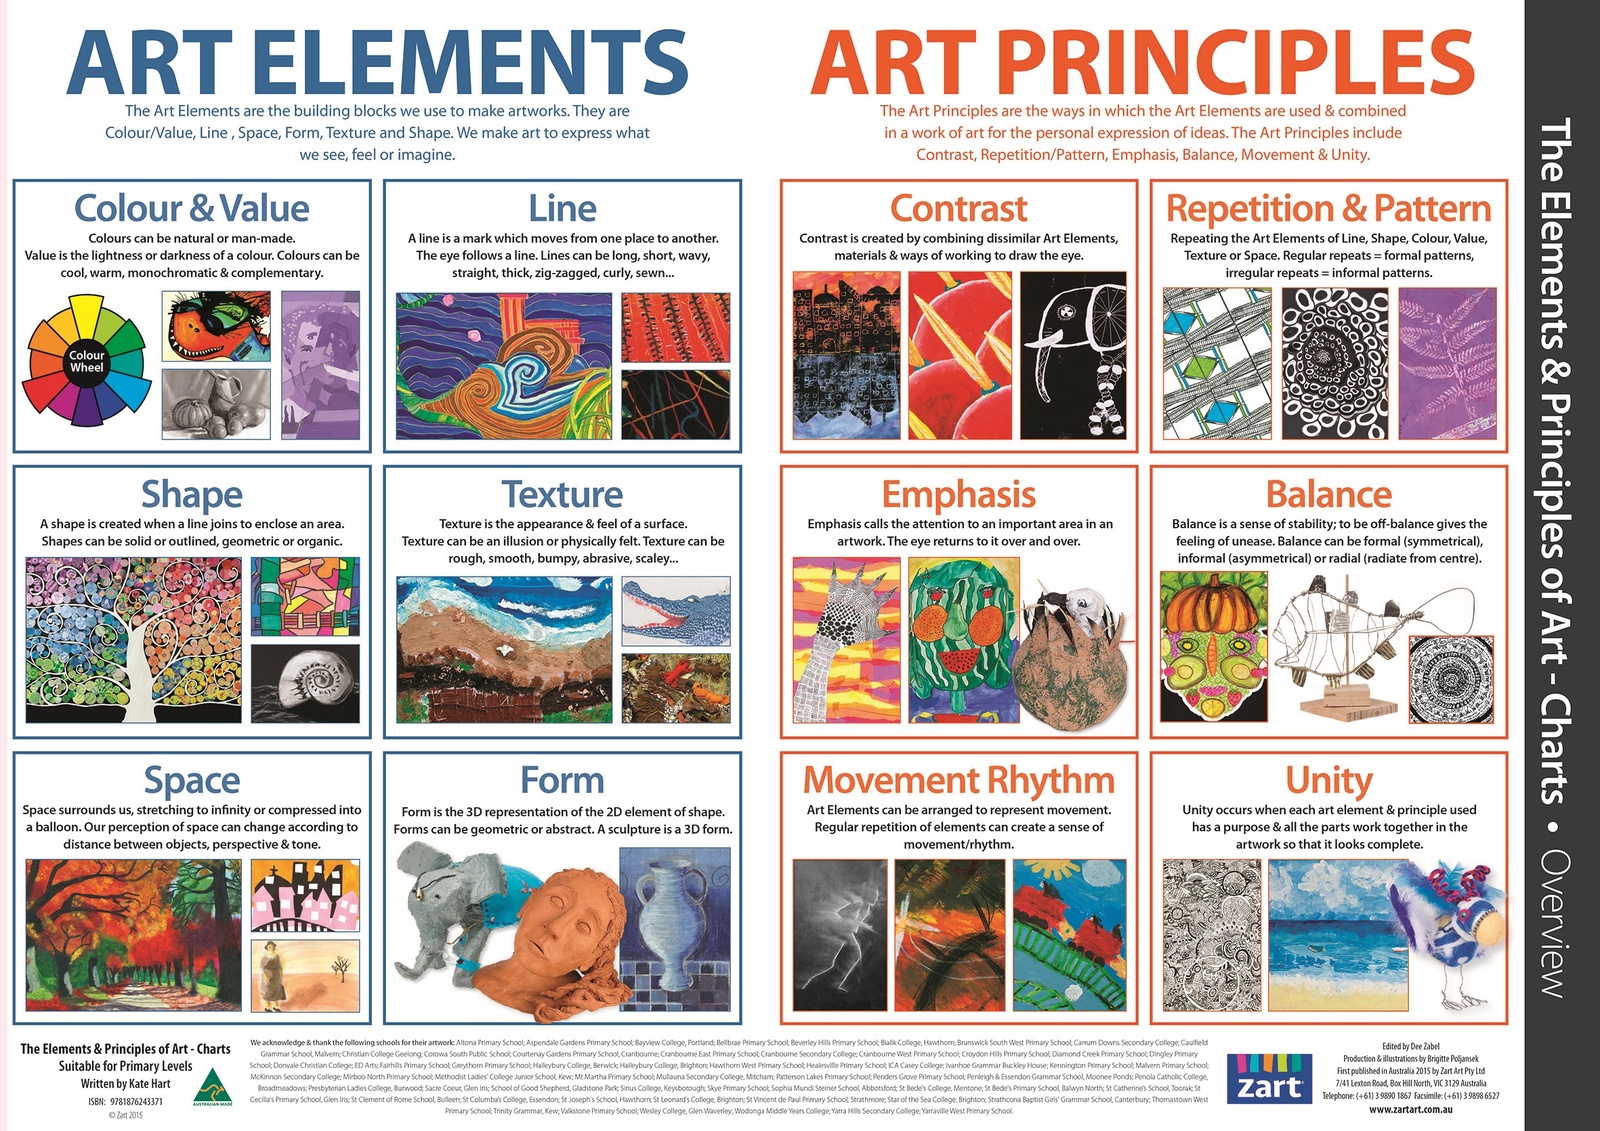 the elements of art